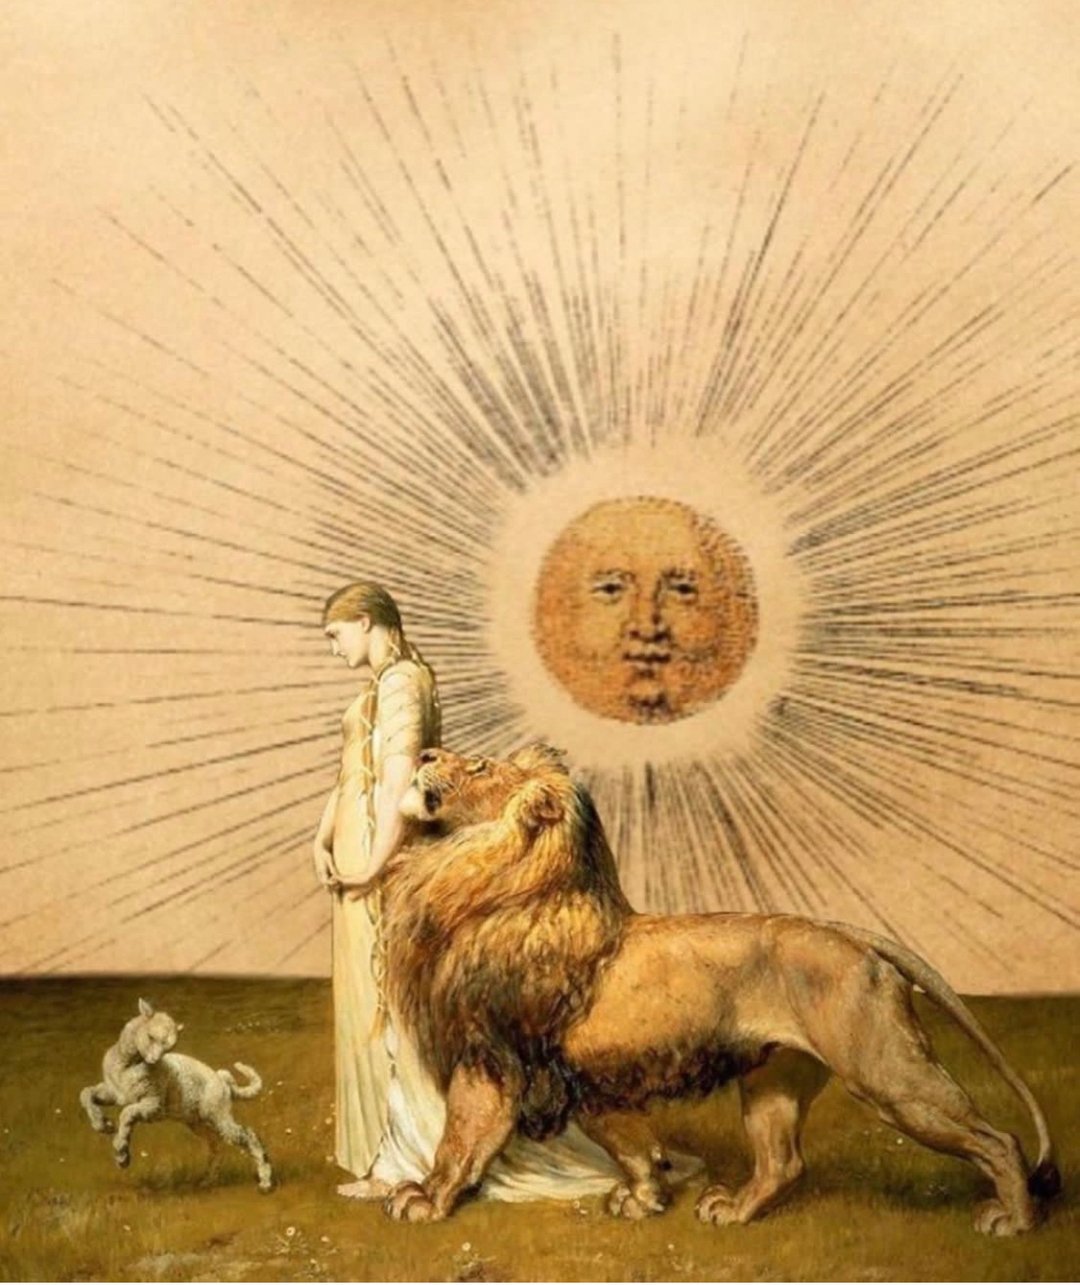 Sooner or later surrender is inevitable. ​​​​​​​​
​​​​​​​​
We might as well begin to practice now. 
​​​​​​​​
#intimacywithlife #awareness #connectonly #nonjudgement #surrender #nocontrol @hheininge #leo #lionandthelamb